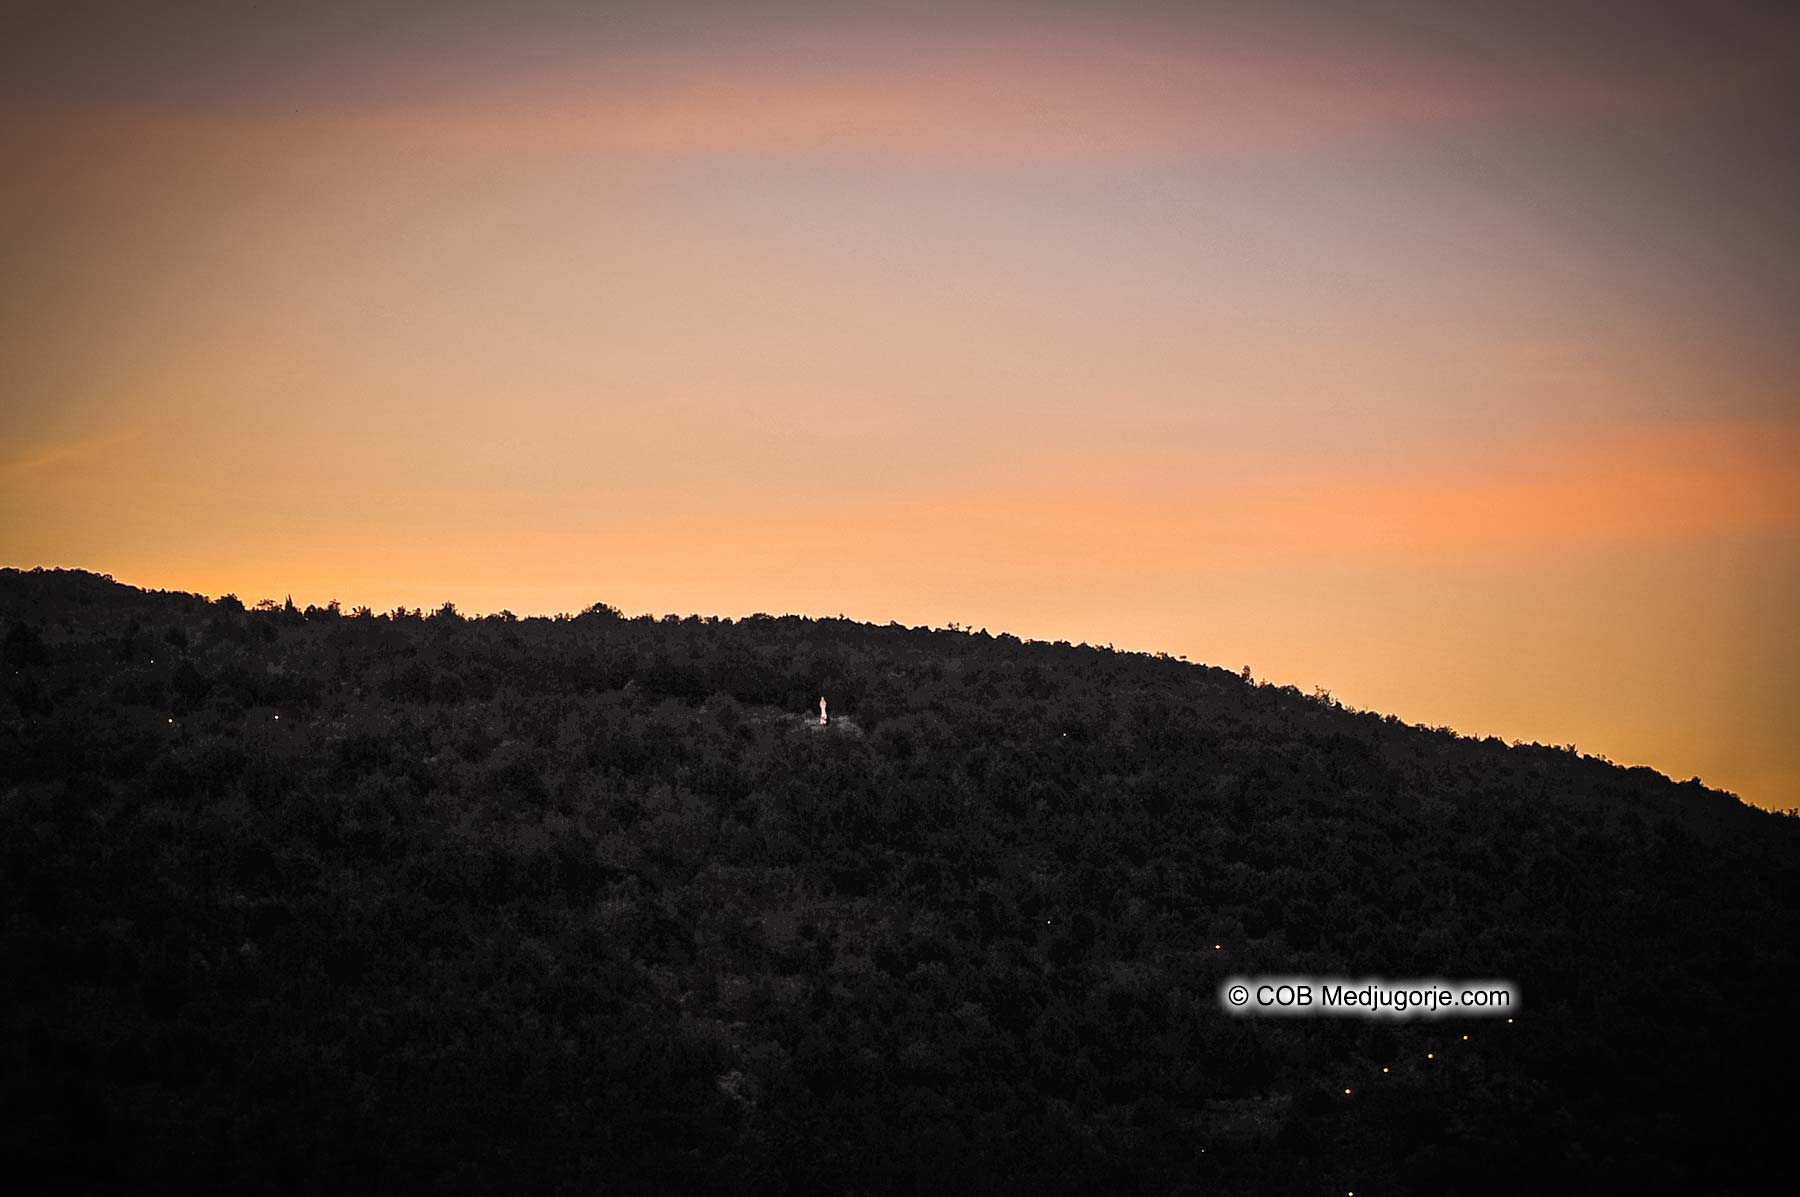 Apparition Mountain in Medjugorje October 12, 2017